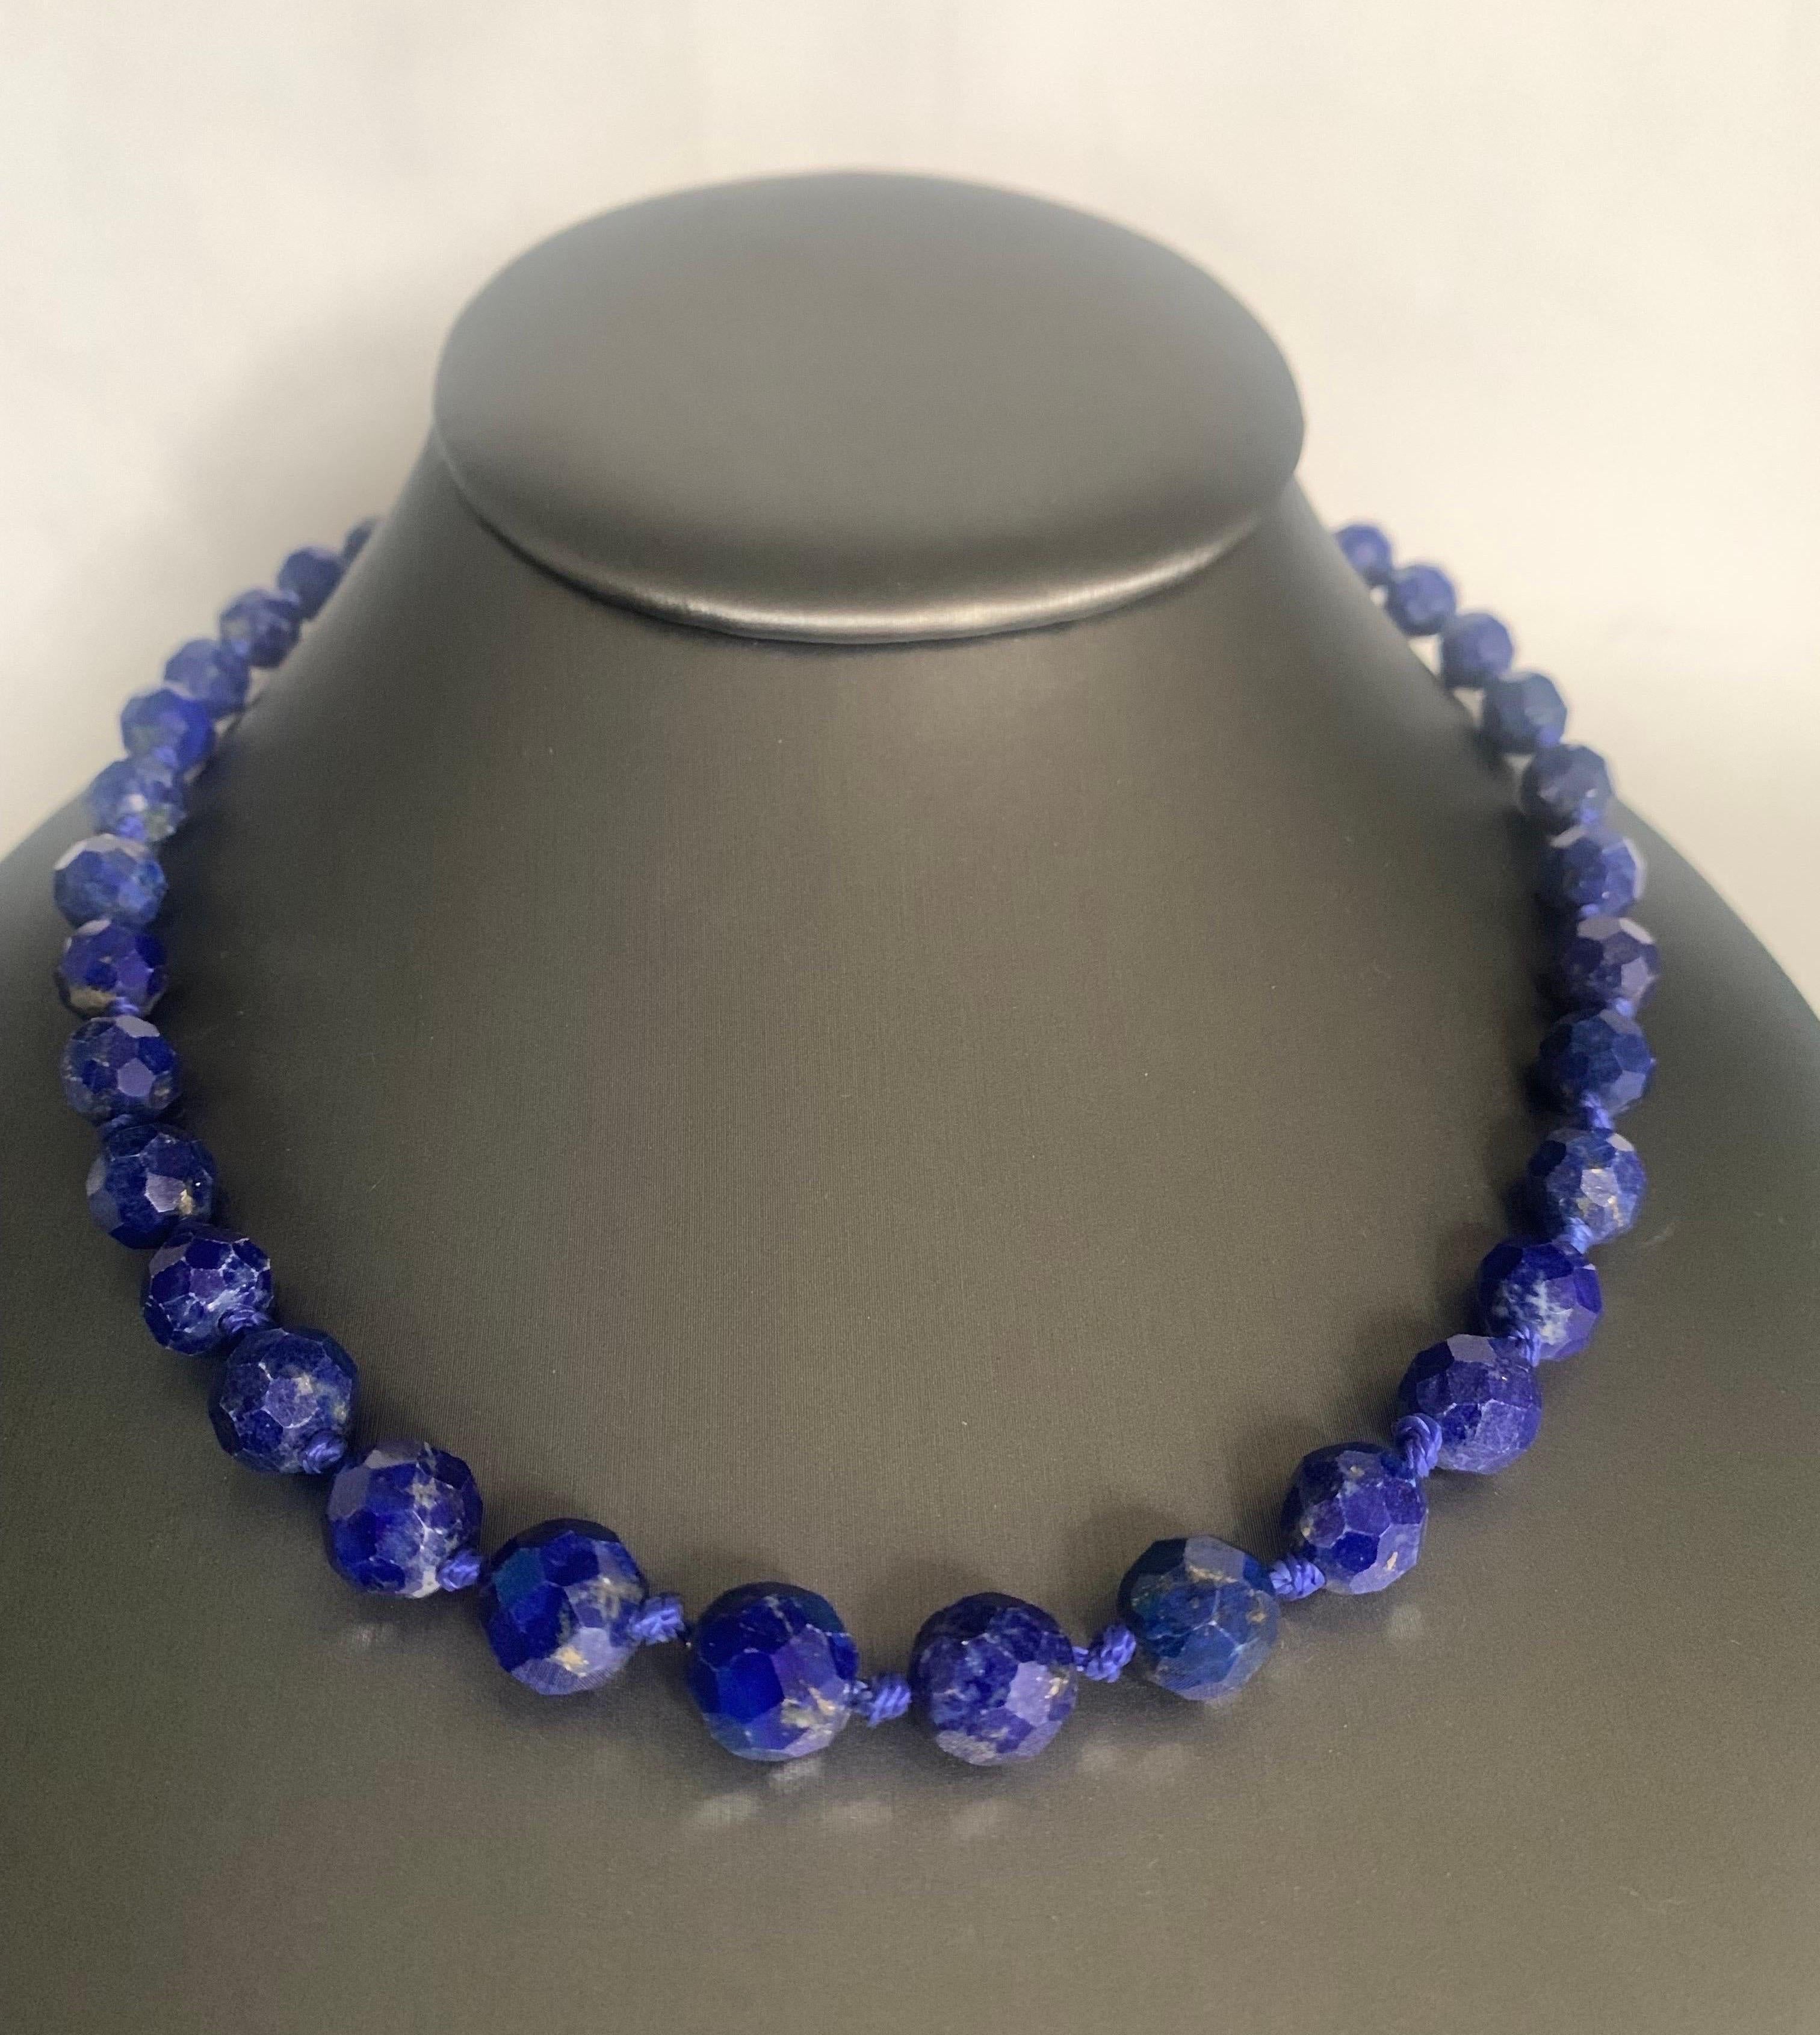 Add elegance to your look with this beautiful lapis lazuli necklace. This 17 inches in length graduated strand necklace is fully knotted and hand strung with matching silk cord. The necklace comprises 39 vivid blue measuring 6.5-9.5 mm and closure